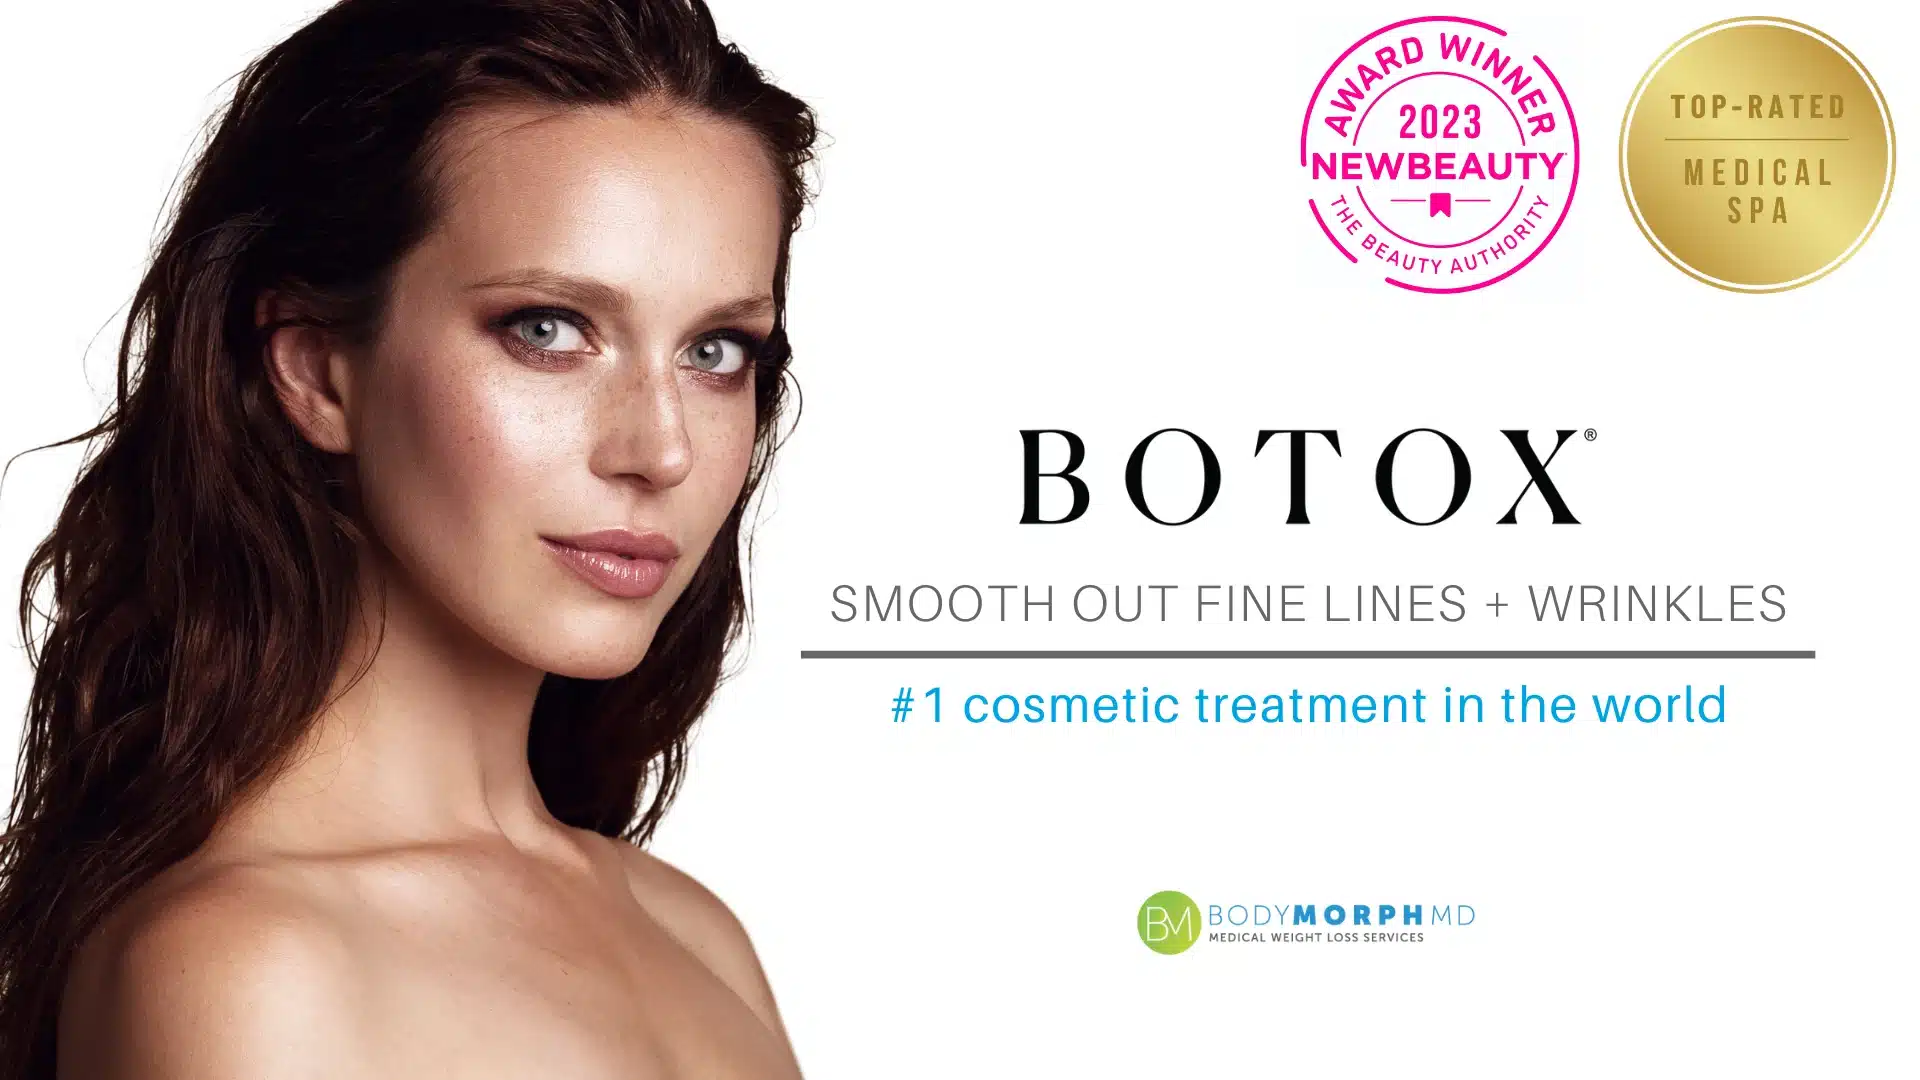 Woman with a pretty face promoting Botox injections in Naples, FL